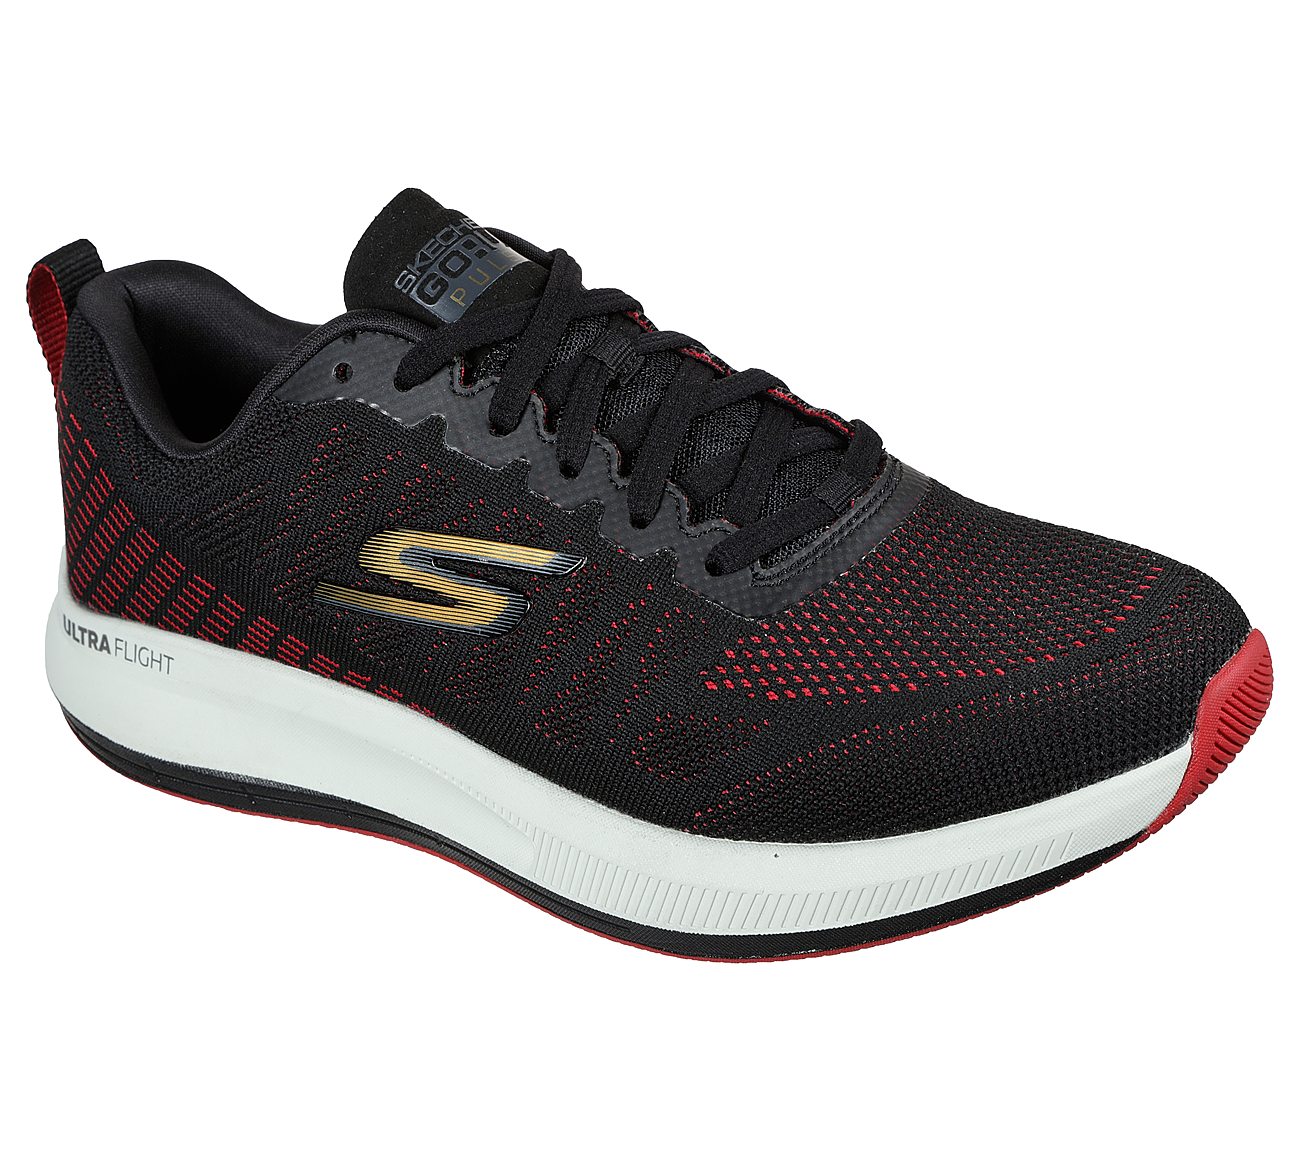 GO RUN PULSE - STRADA, BLACK/RED Footwear Lateral View